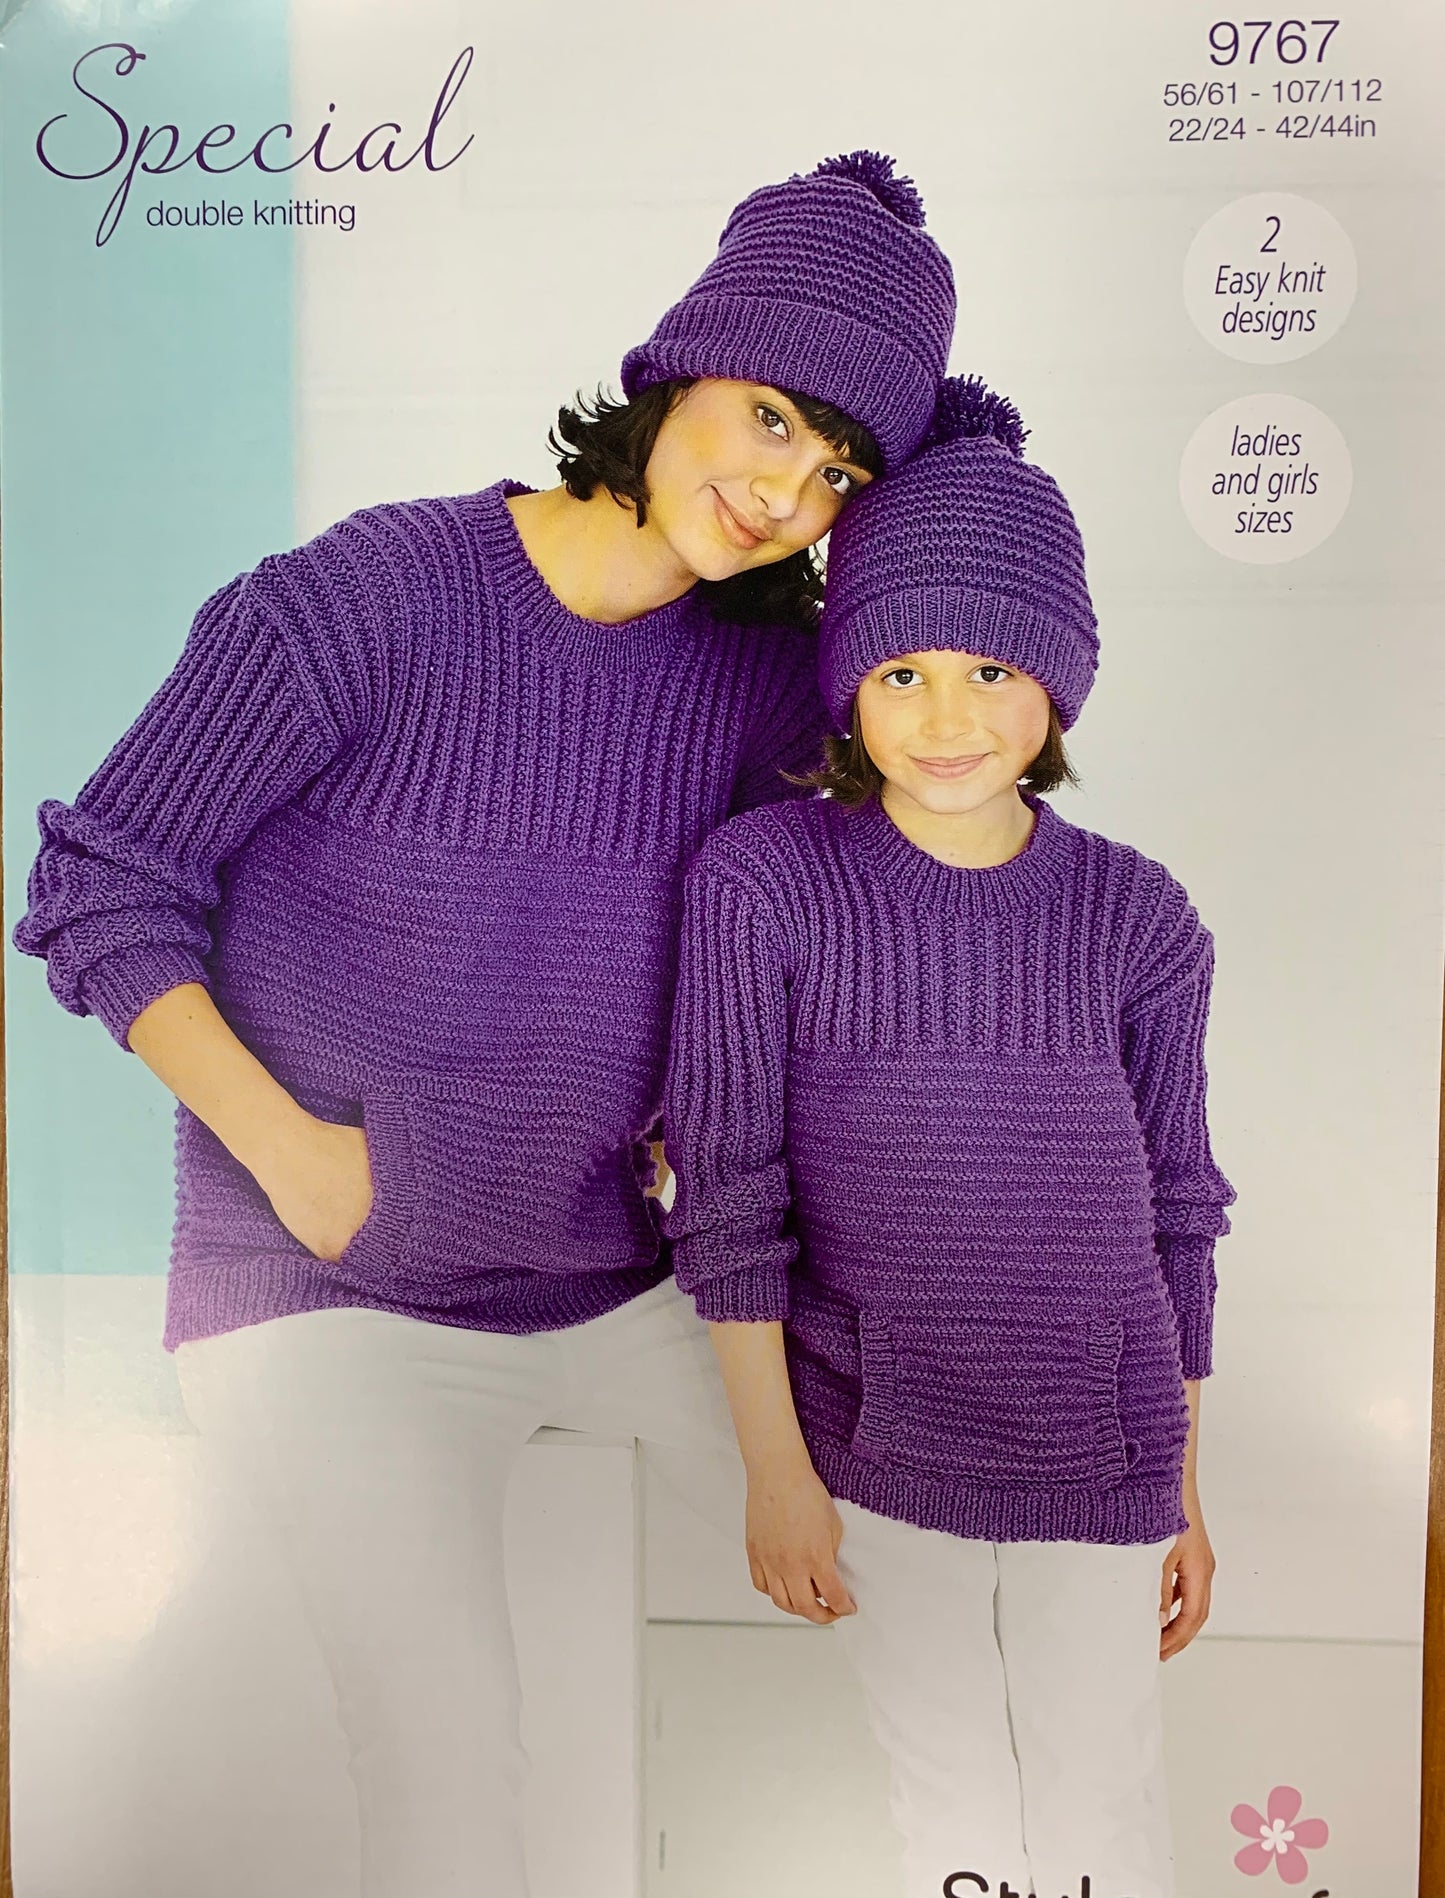 9767 Stylecraft Special dk ladies and child sweater and hat knitting pattern